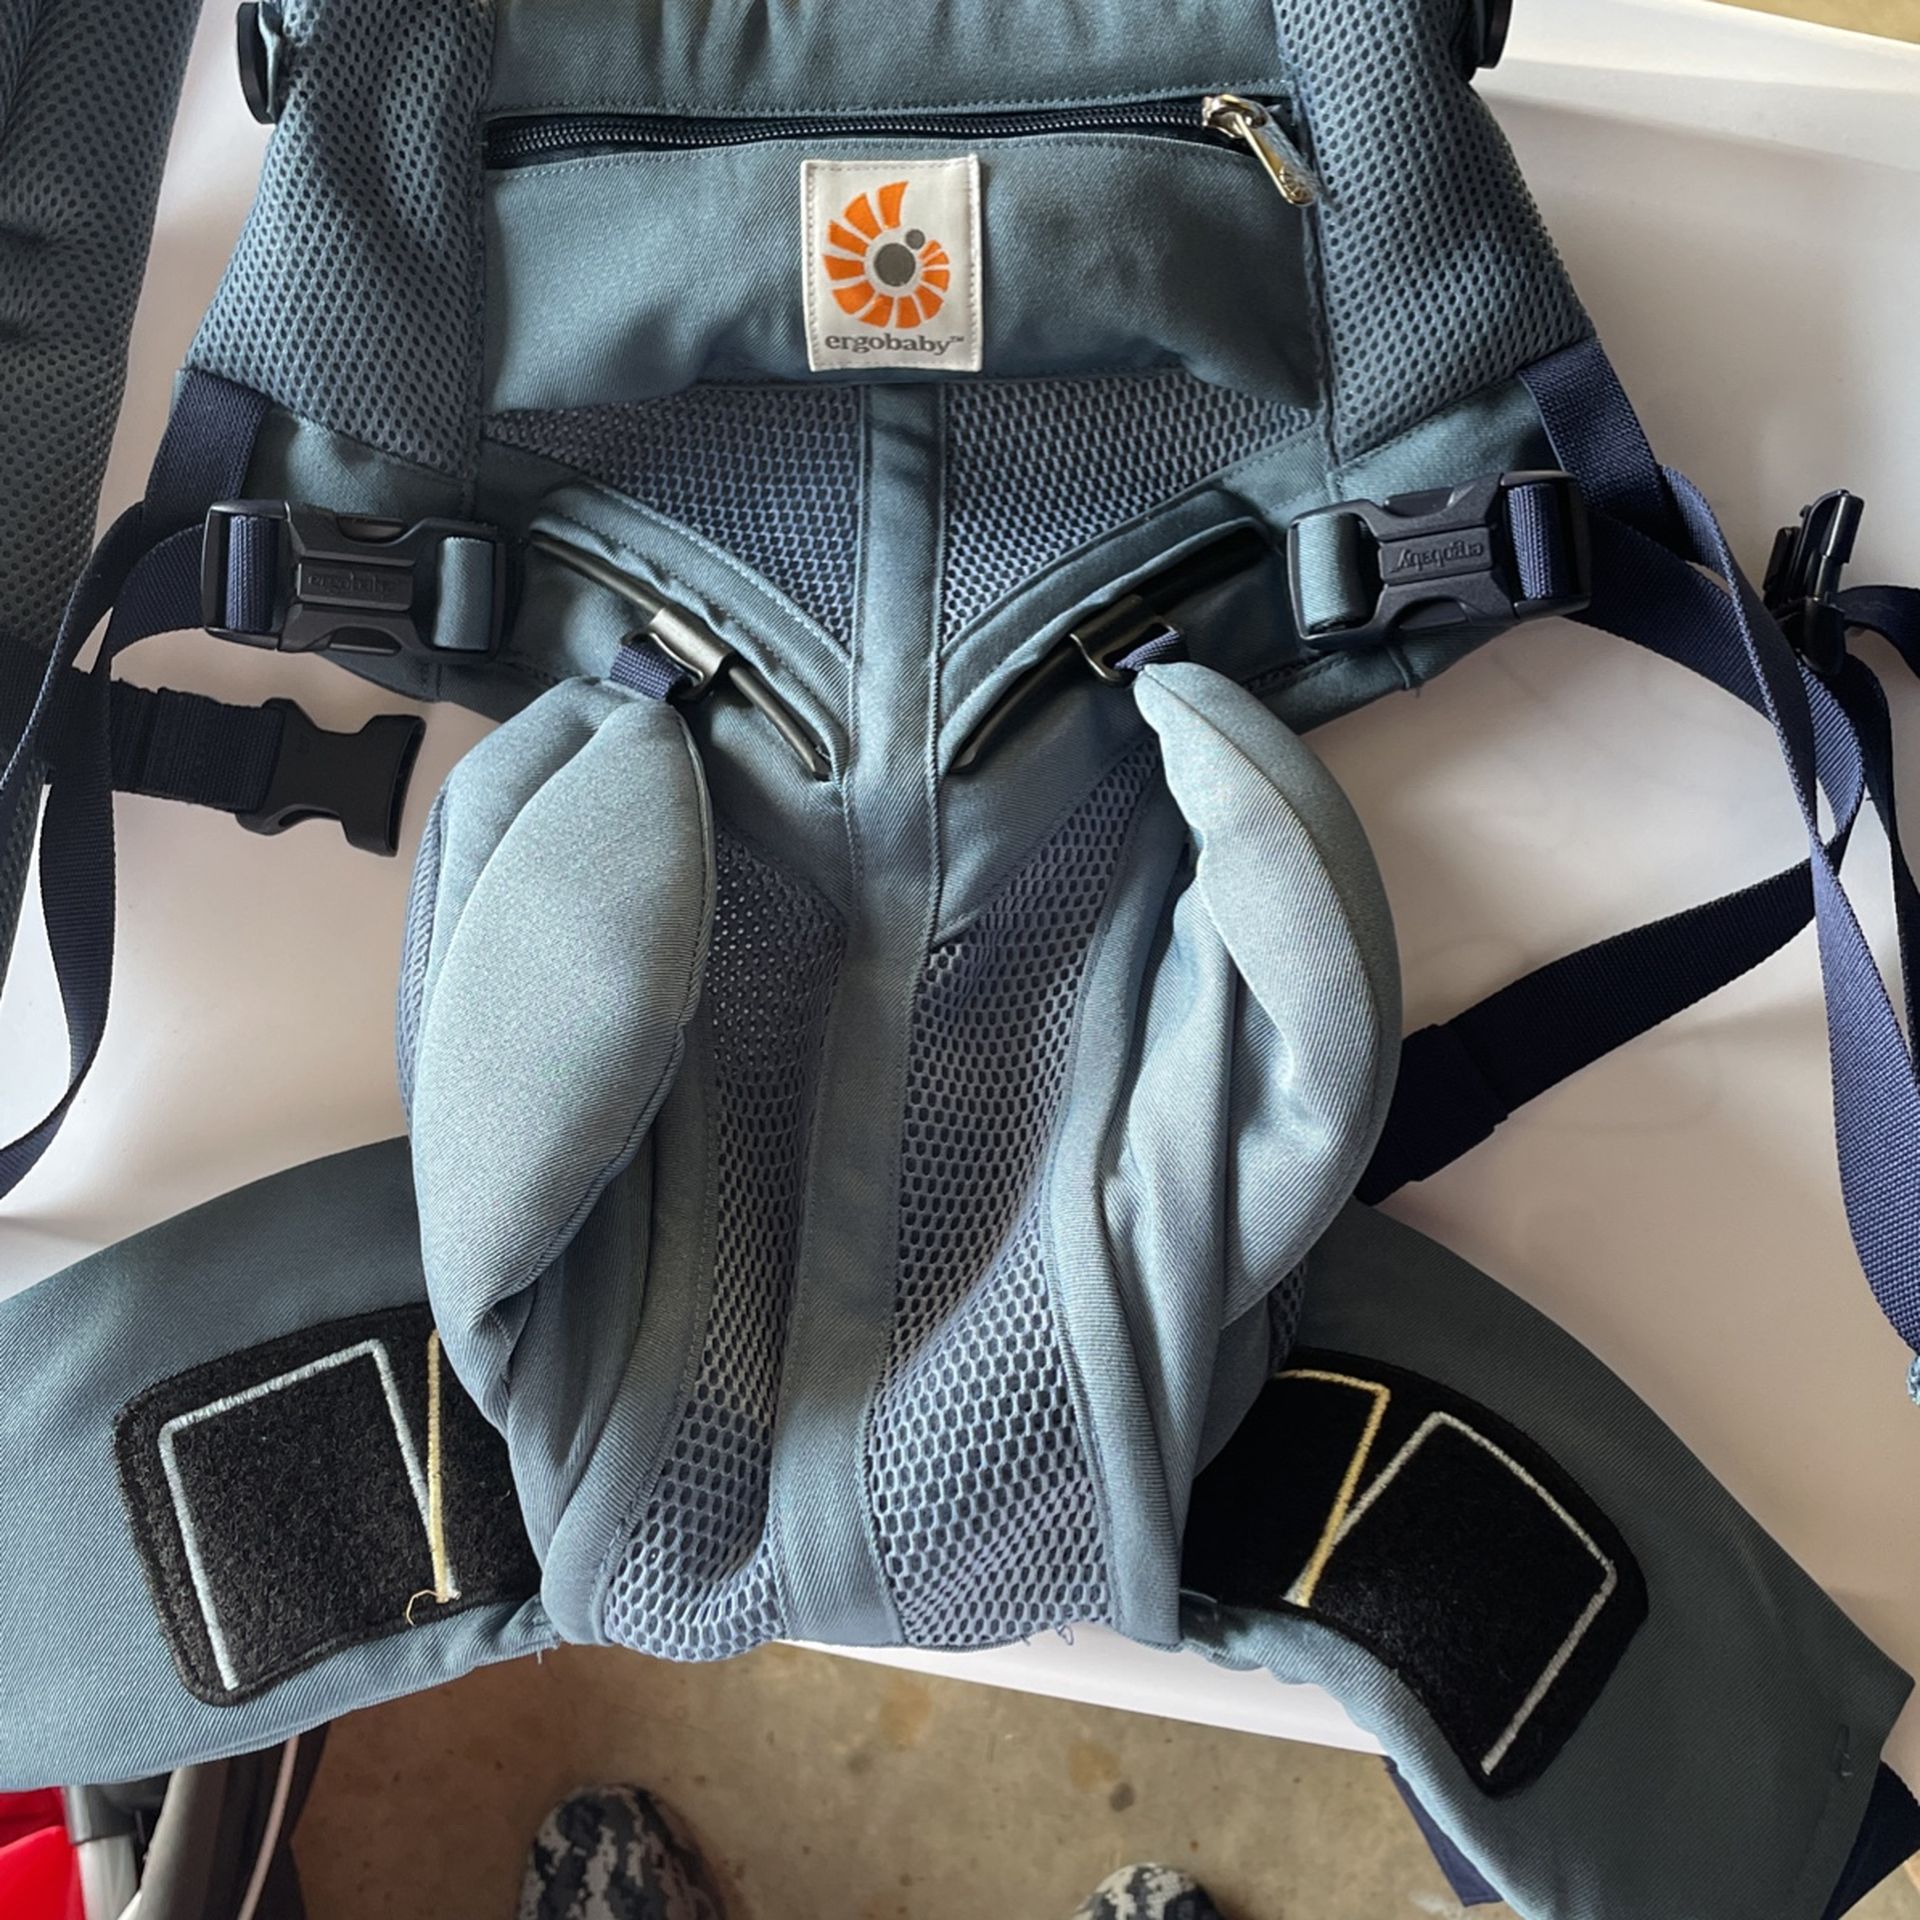 Ergo baby Carrier Used Only Once 